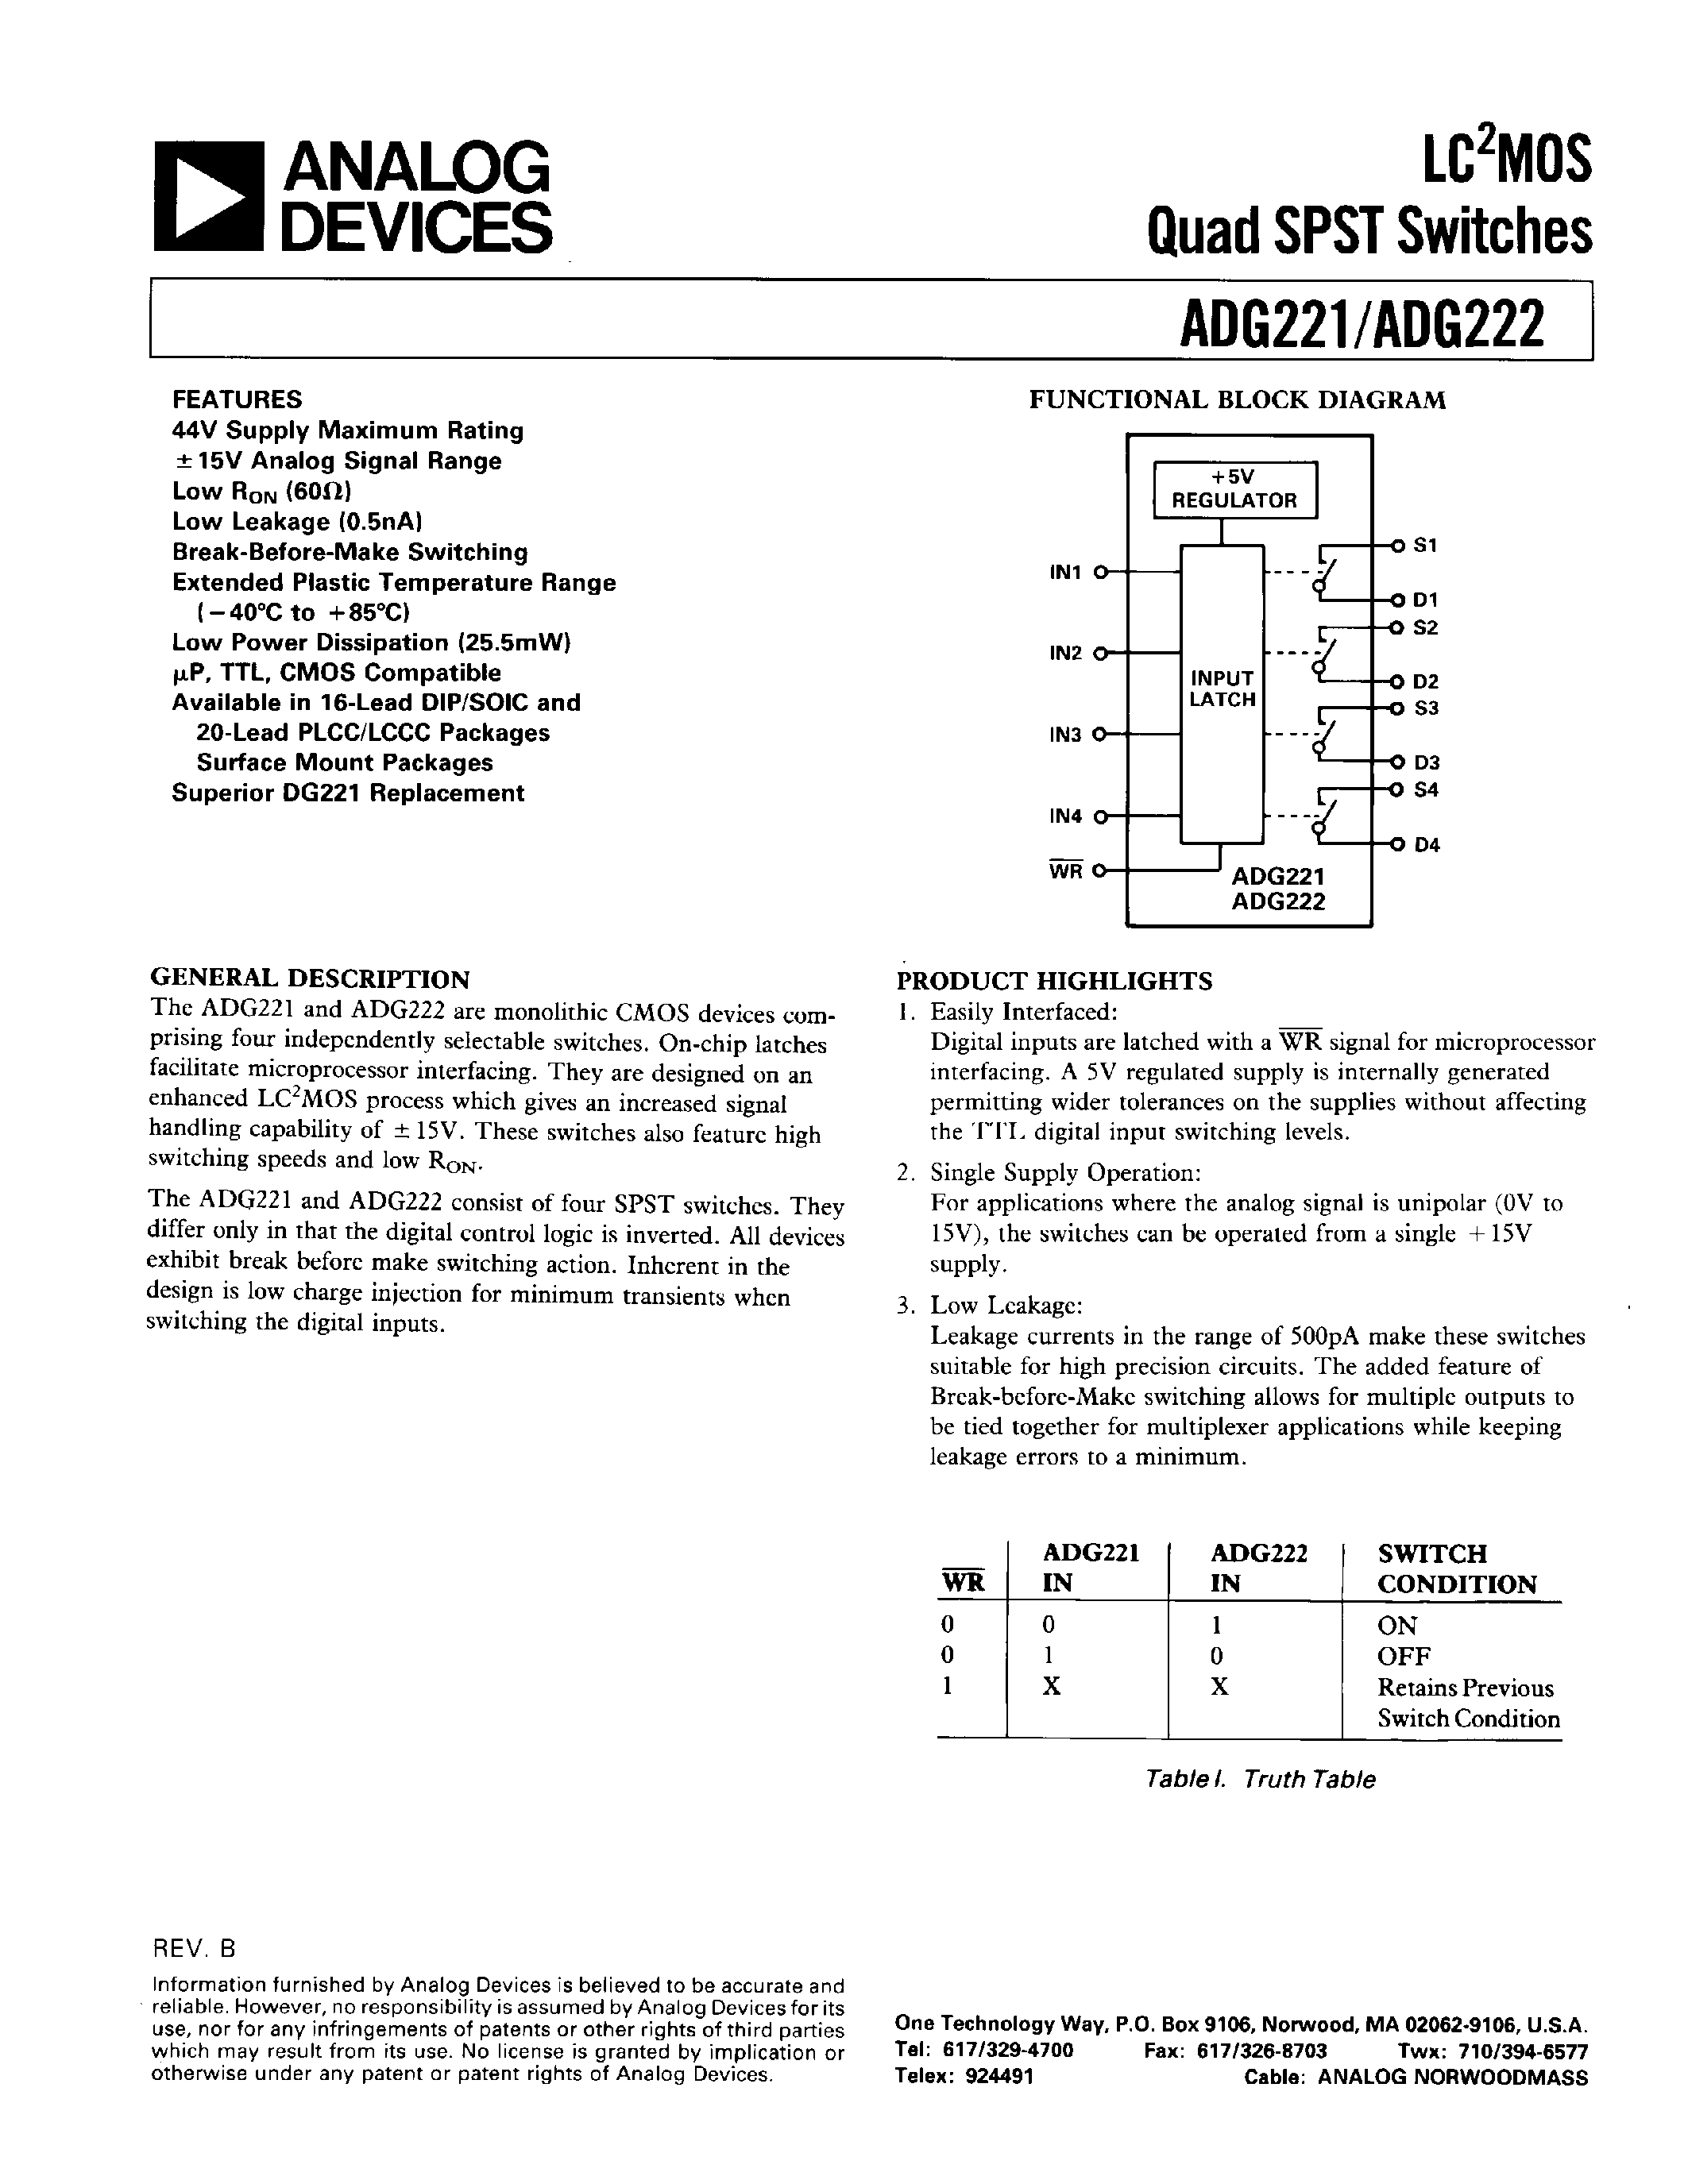 Datasheet ADG222KR - LC2MOS QUAD SPST SWITCHES page 1